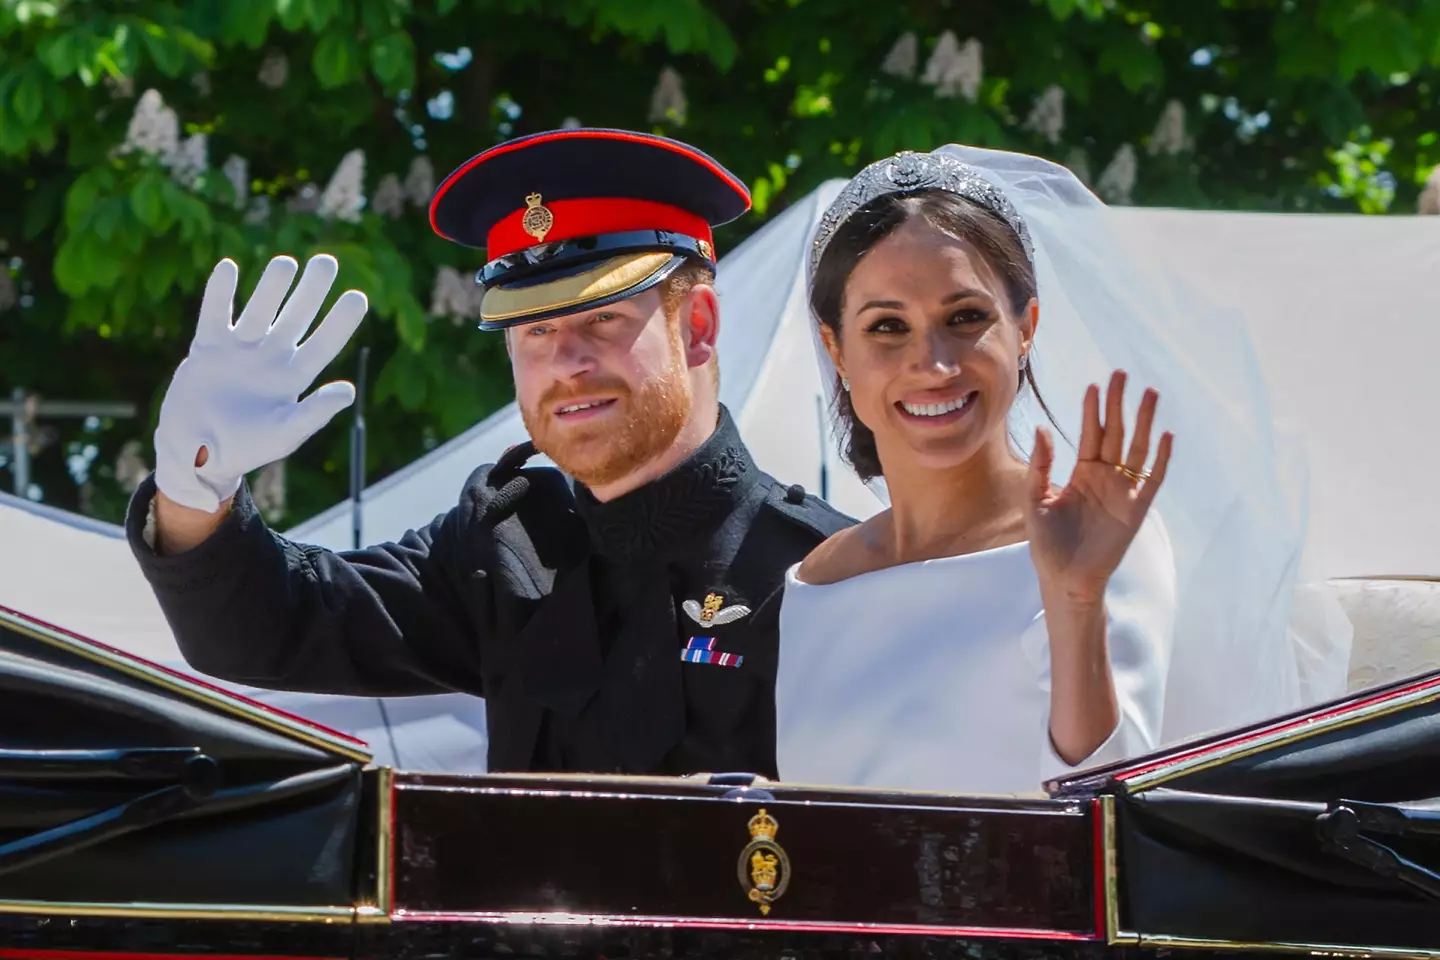 The former BBC royal correspondent Peter Hunt has recently said that the royals could have done more to keep Harry and Meghan within the Firm, and that the Duchess of Sussex could have benefitted the family (Alamy Stock Photo).